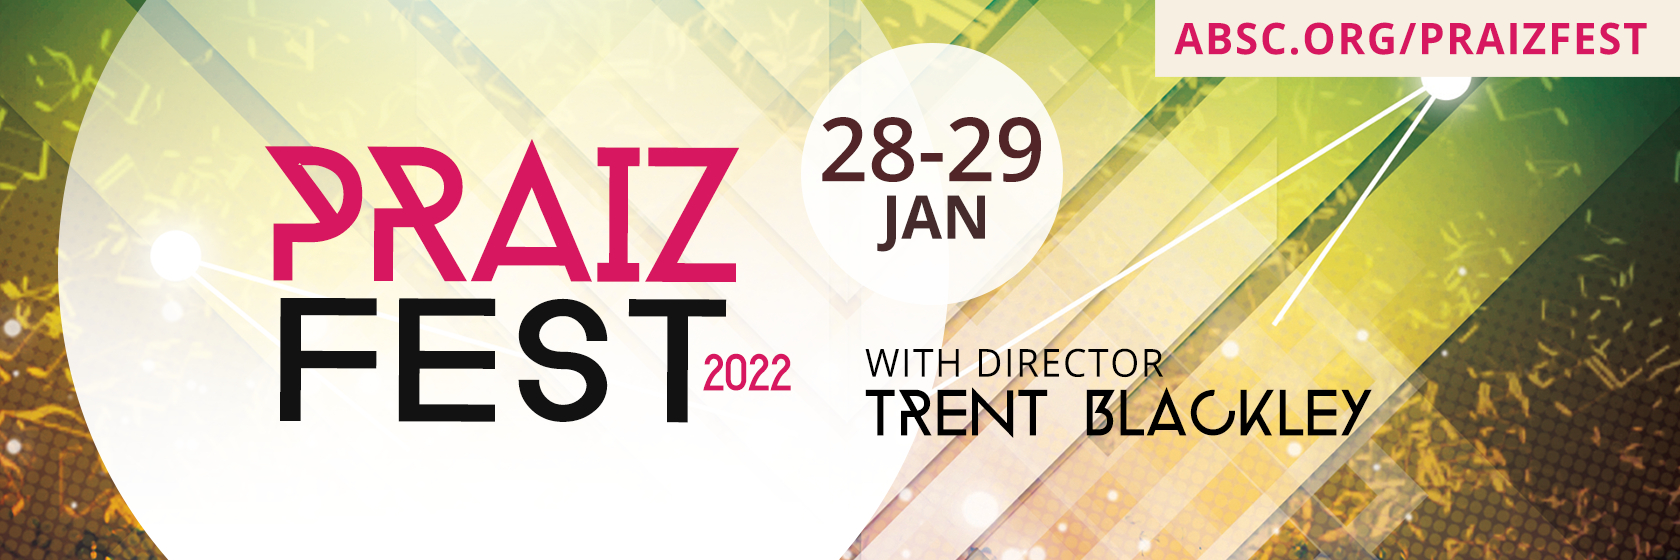 We hope to see you at PraizeFest 2022!